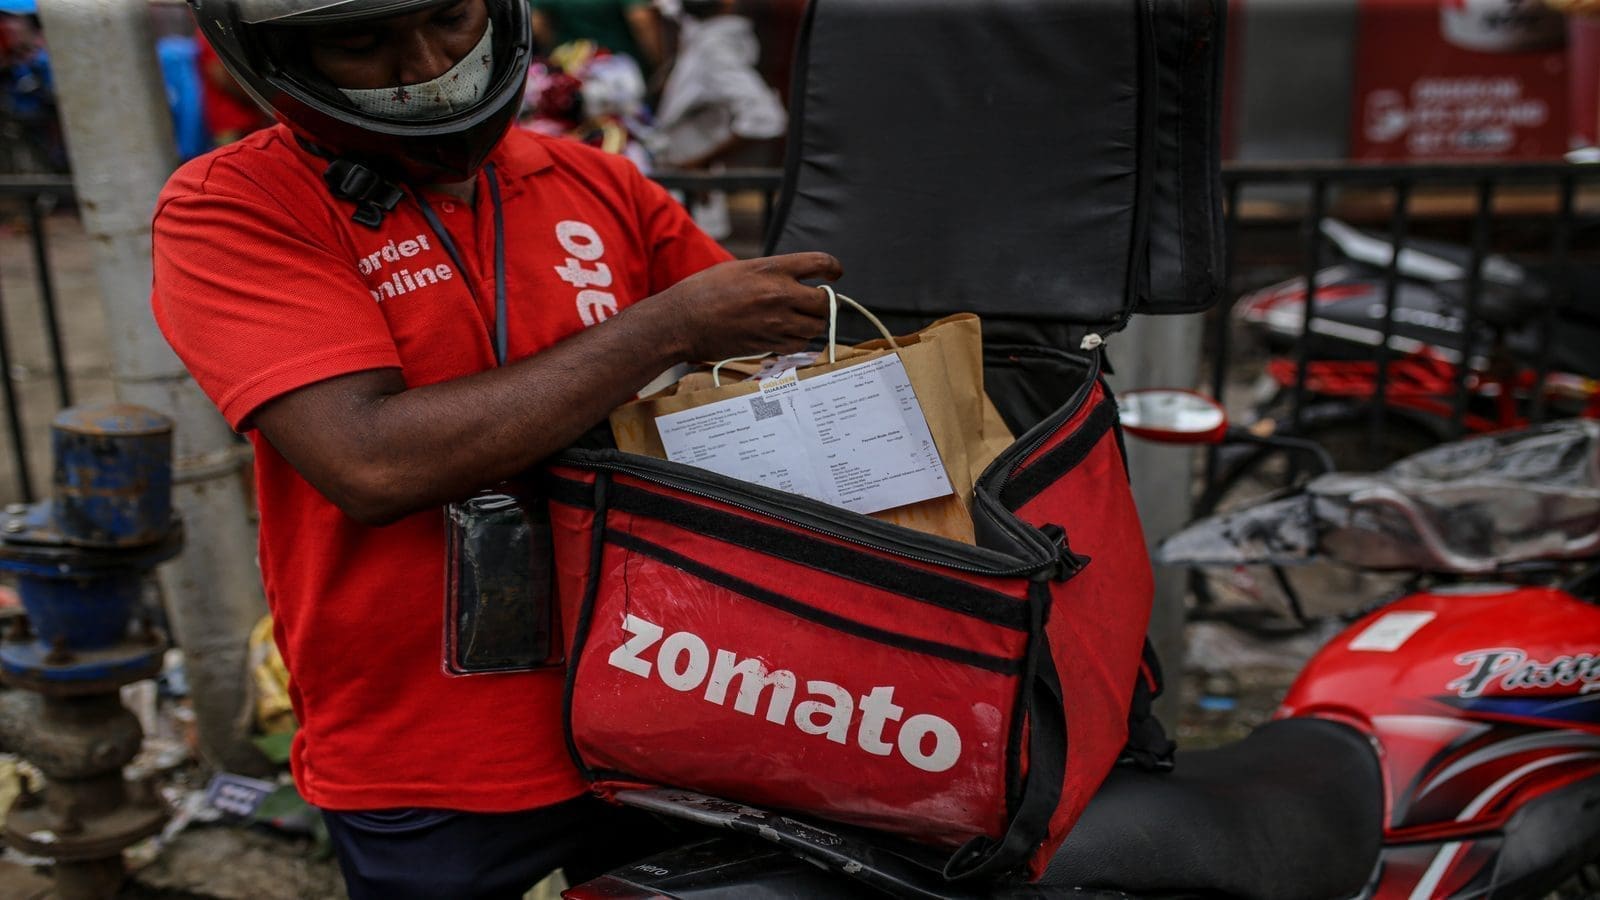 Zomato’s loss contracts to ₹251 crore backed by sharp rise in income from food delivery